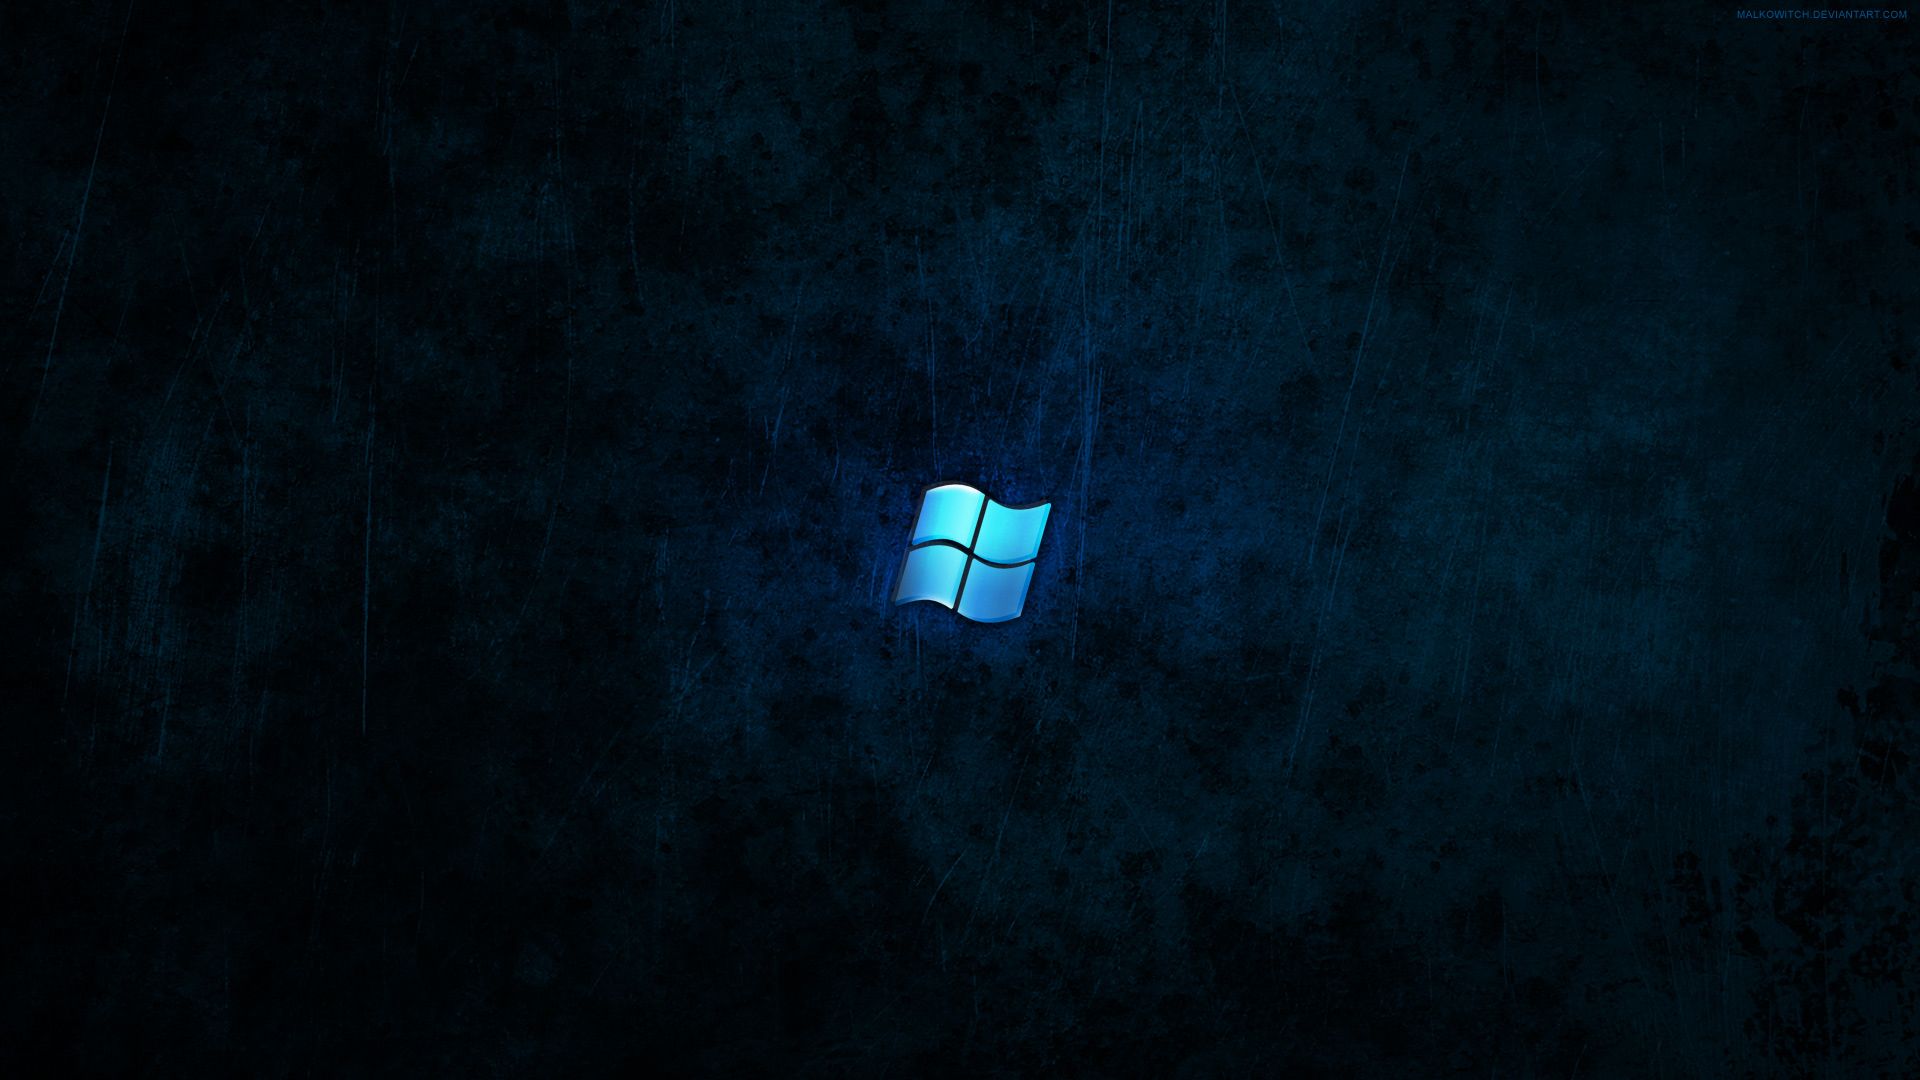 High Definition Blue Wallpaper For Dark Image In